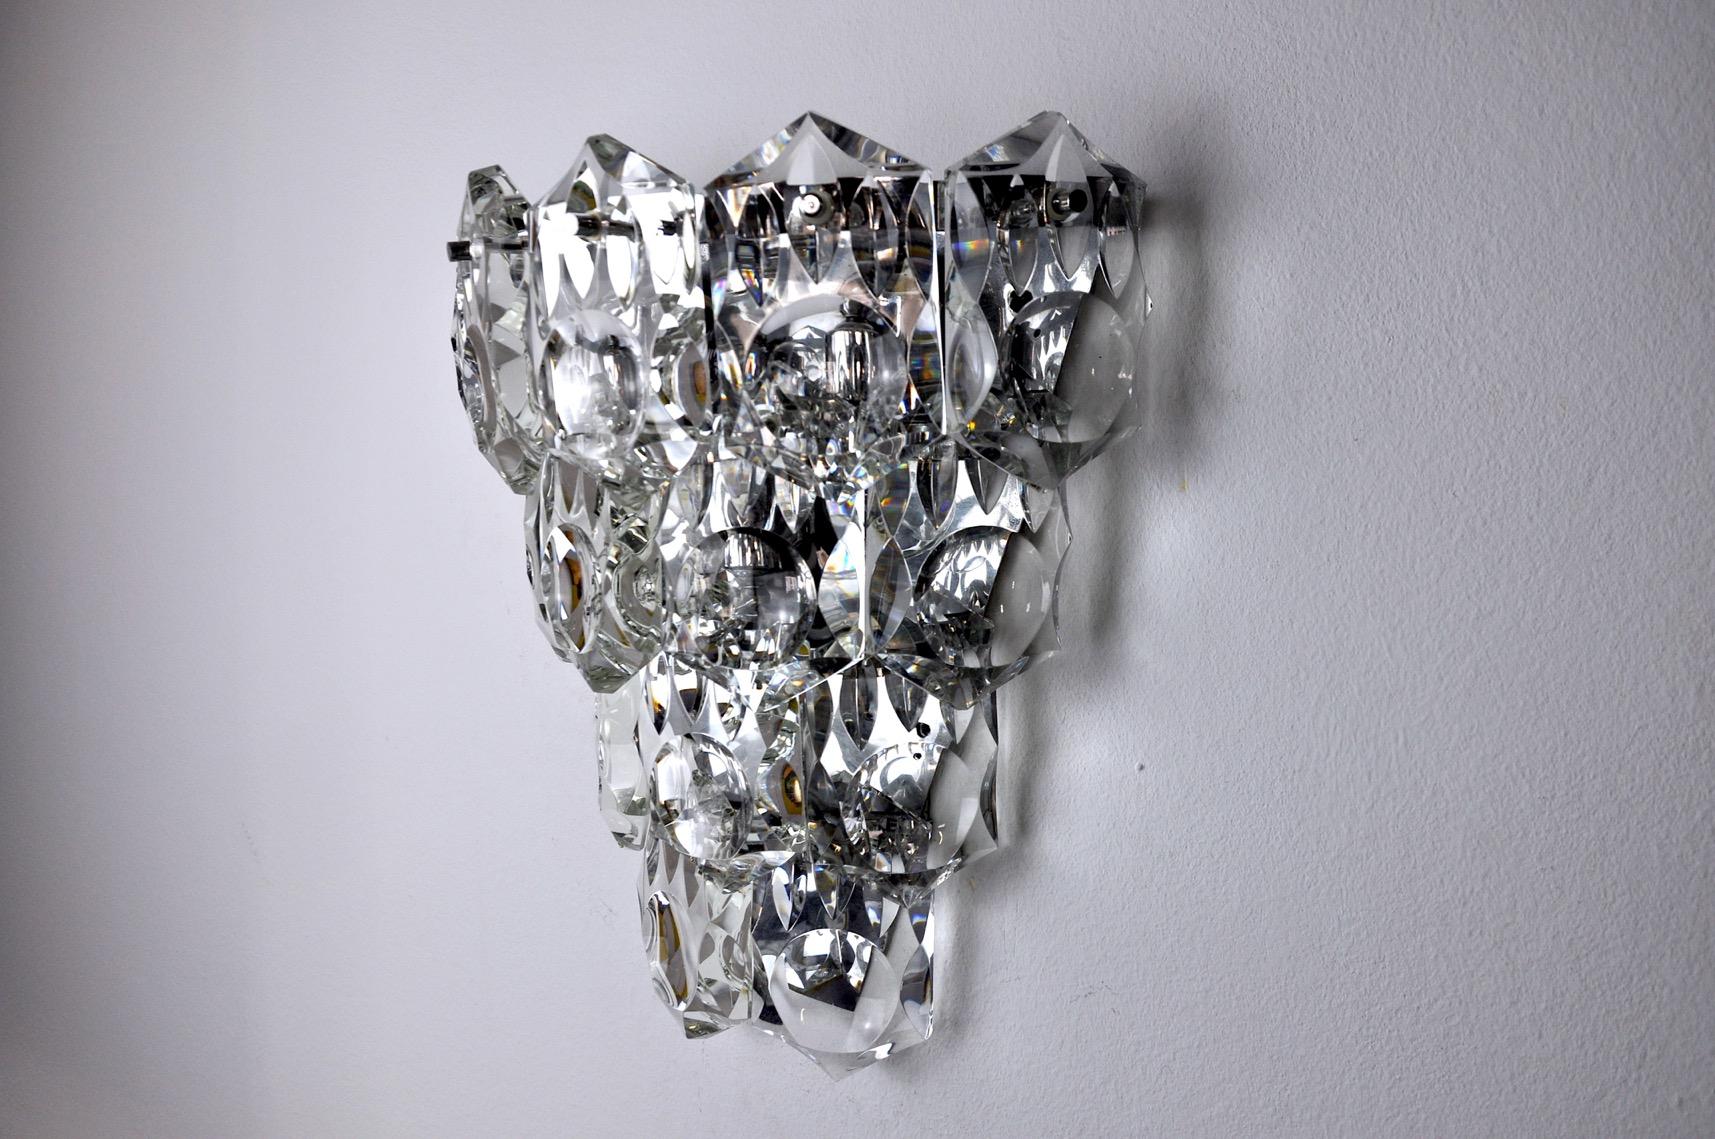 Rare and large wall lamp kinkeldey designed and produced in Germany in the 70s. Chromed metal structure composed of cut crystals in perfect state of conservation distributed on 4 levels. Rare design object which will know how to illuminate your